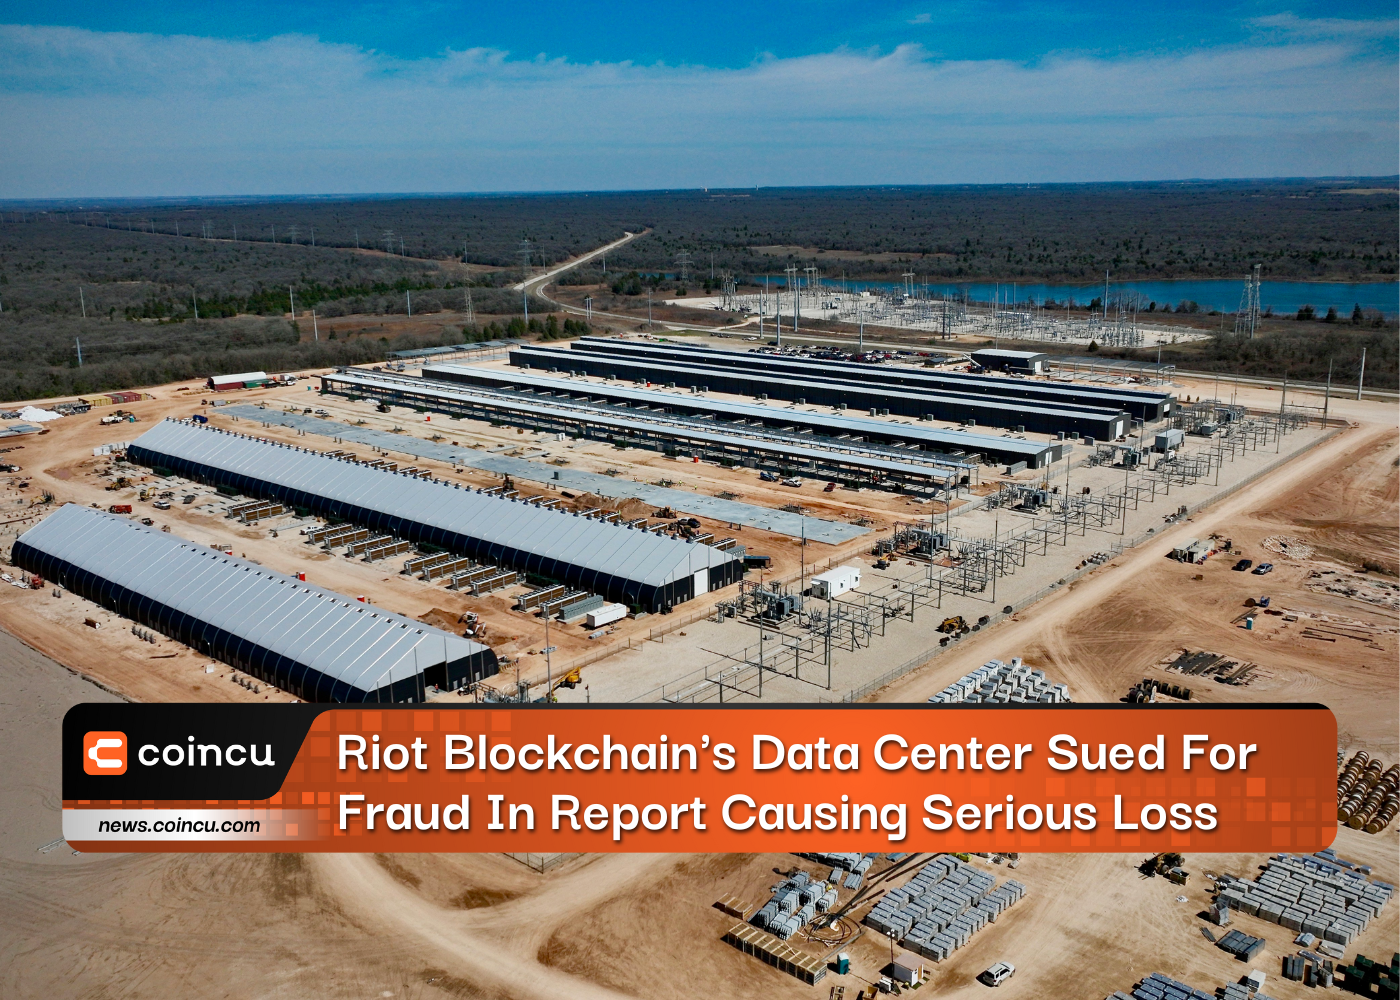 Riot Blockchain's Data Center Sued For Fraud In Report Causing Serious Loss